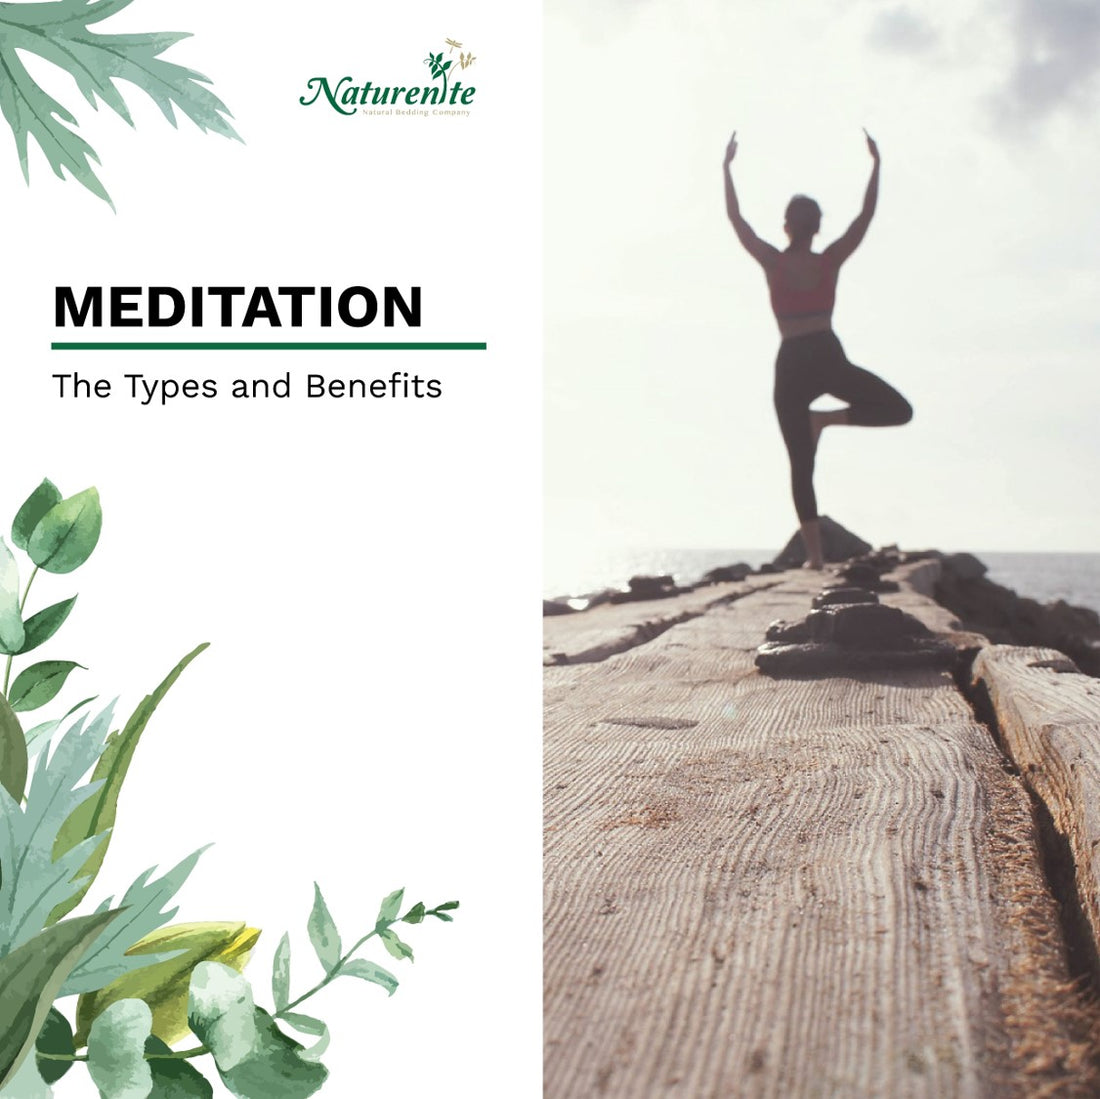 The Types and Benefits of Meditation